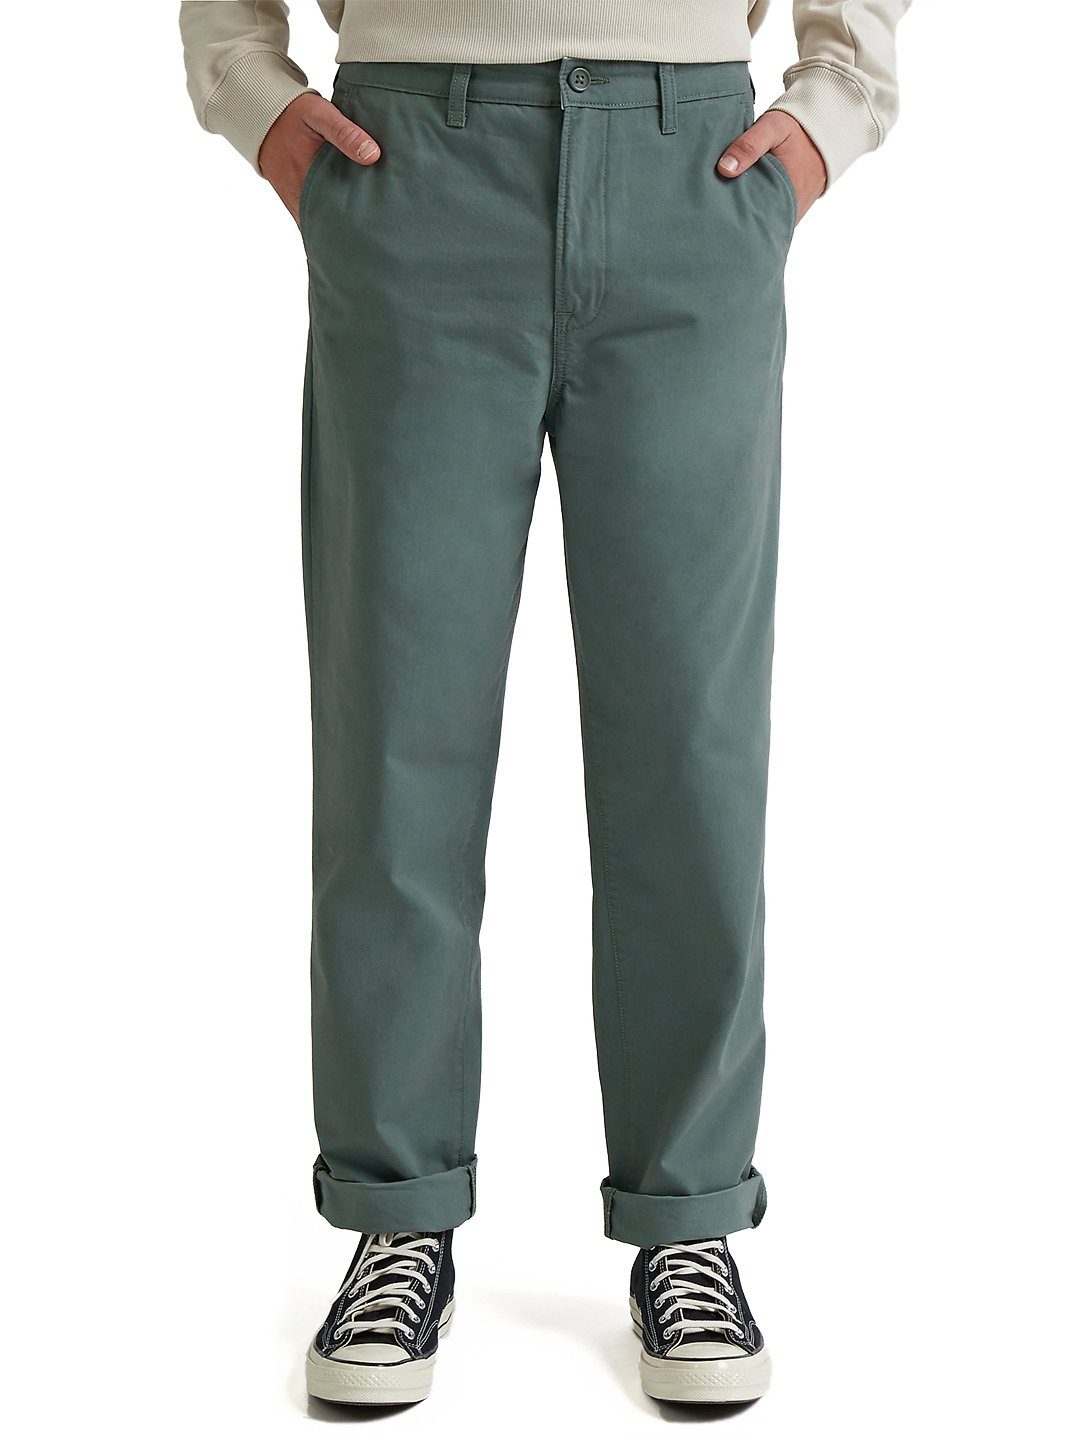 Lee® Chinohose Relaxed Hose Olivgrün - Relaxed Chino - Länge:32